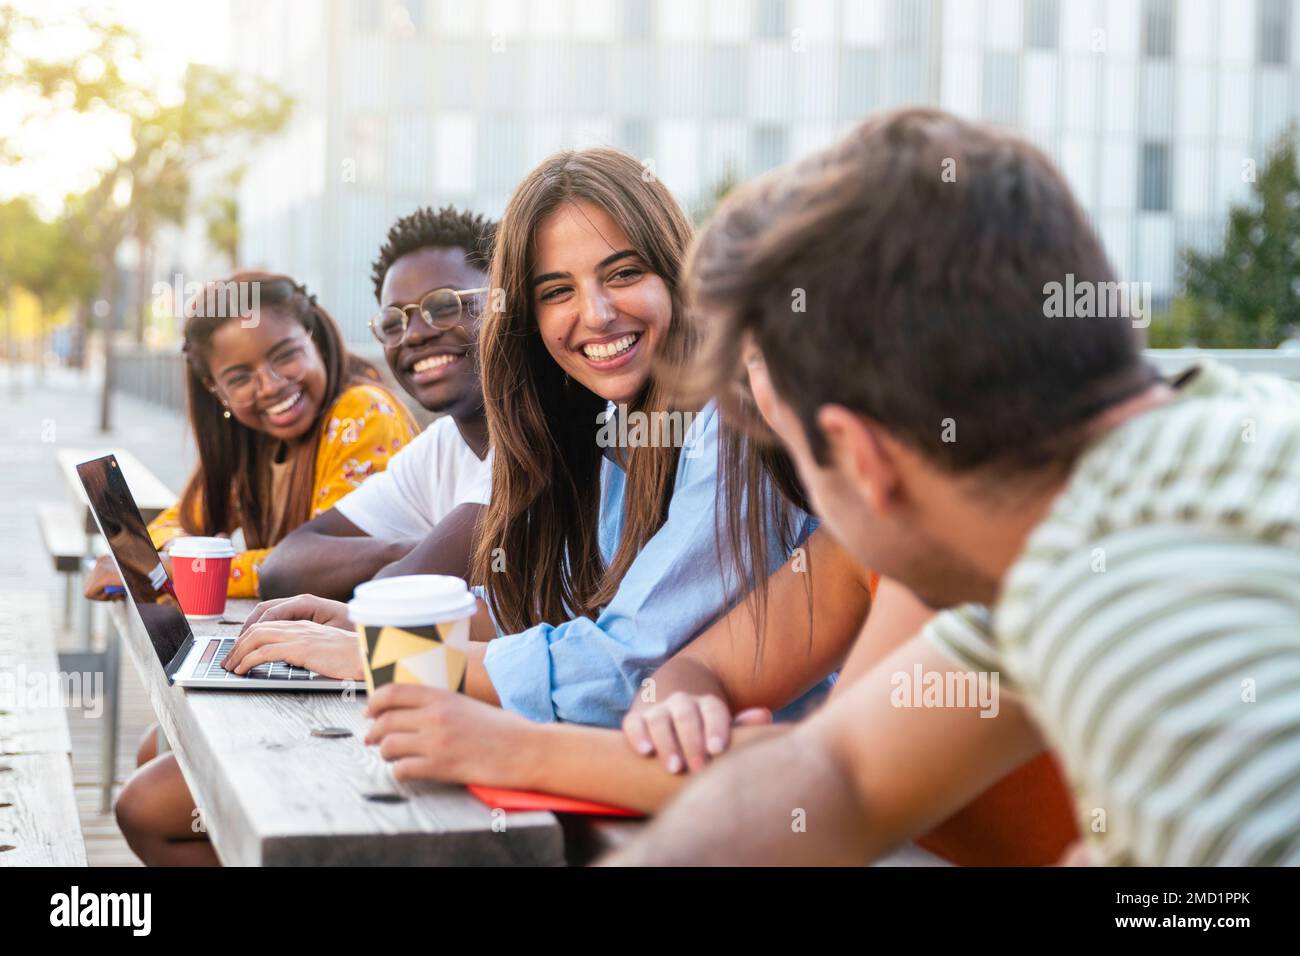 Group of five friends having fun together - students talking laughing and enjoying their time - focus on girl - education concept Stock Photo